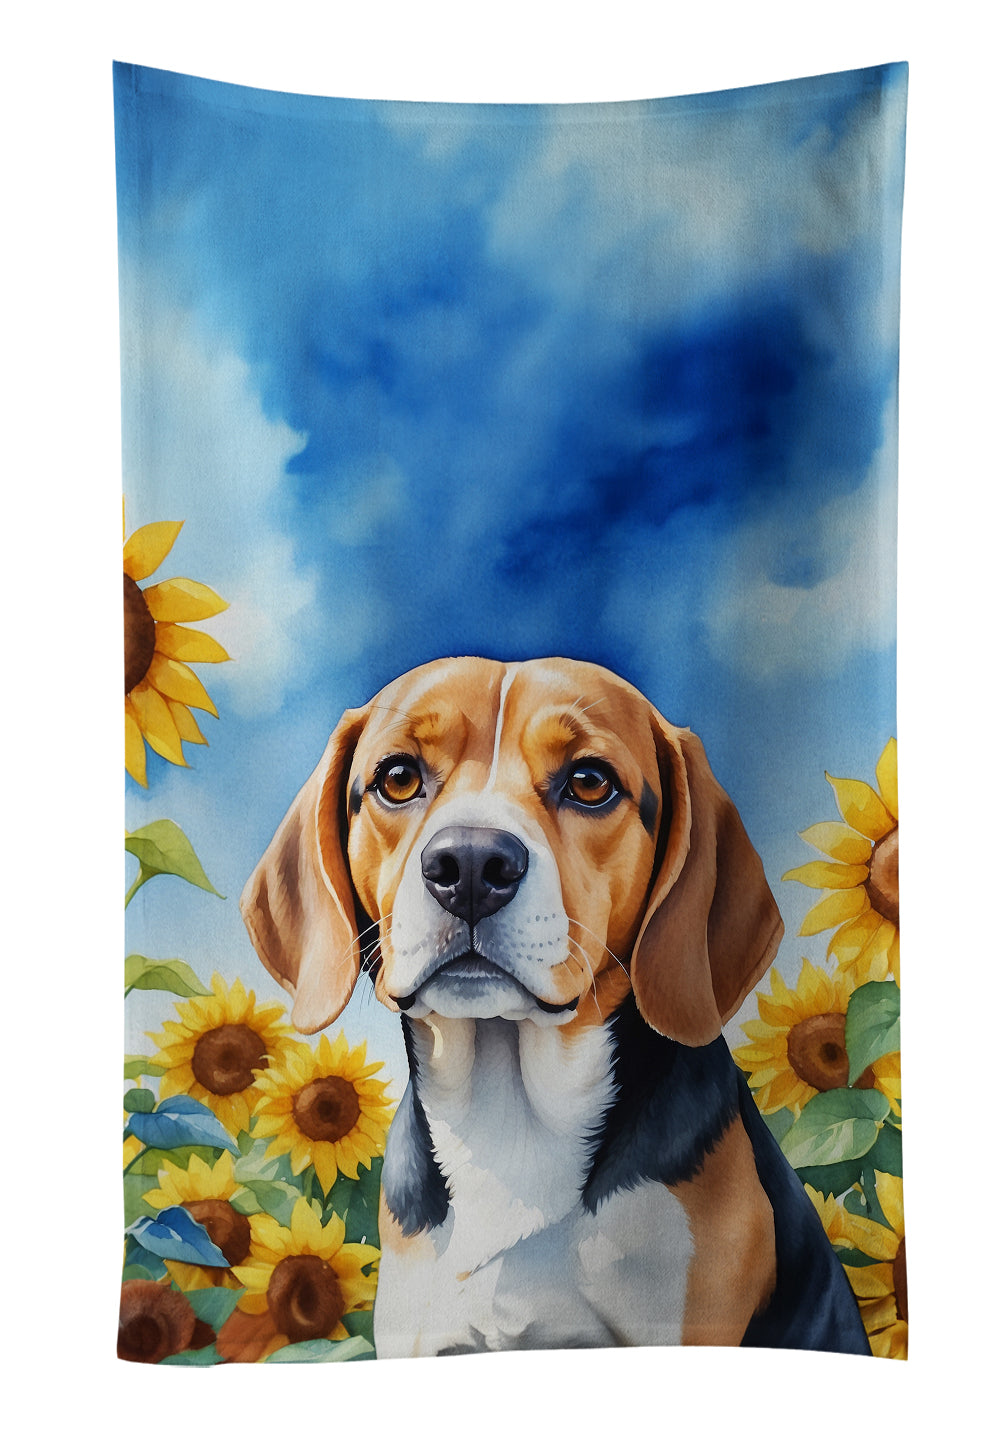 Buy this Beagle in Sunflowers Kitchen Towel